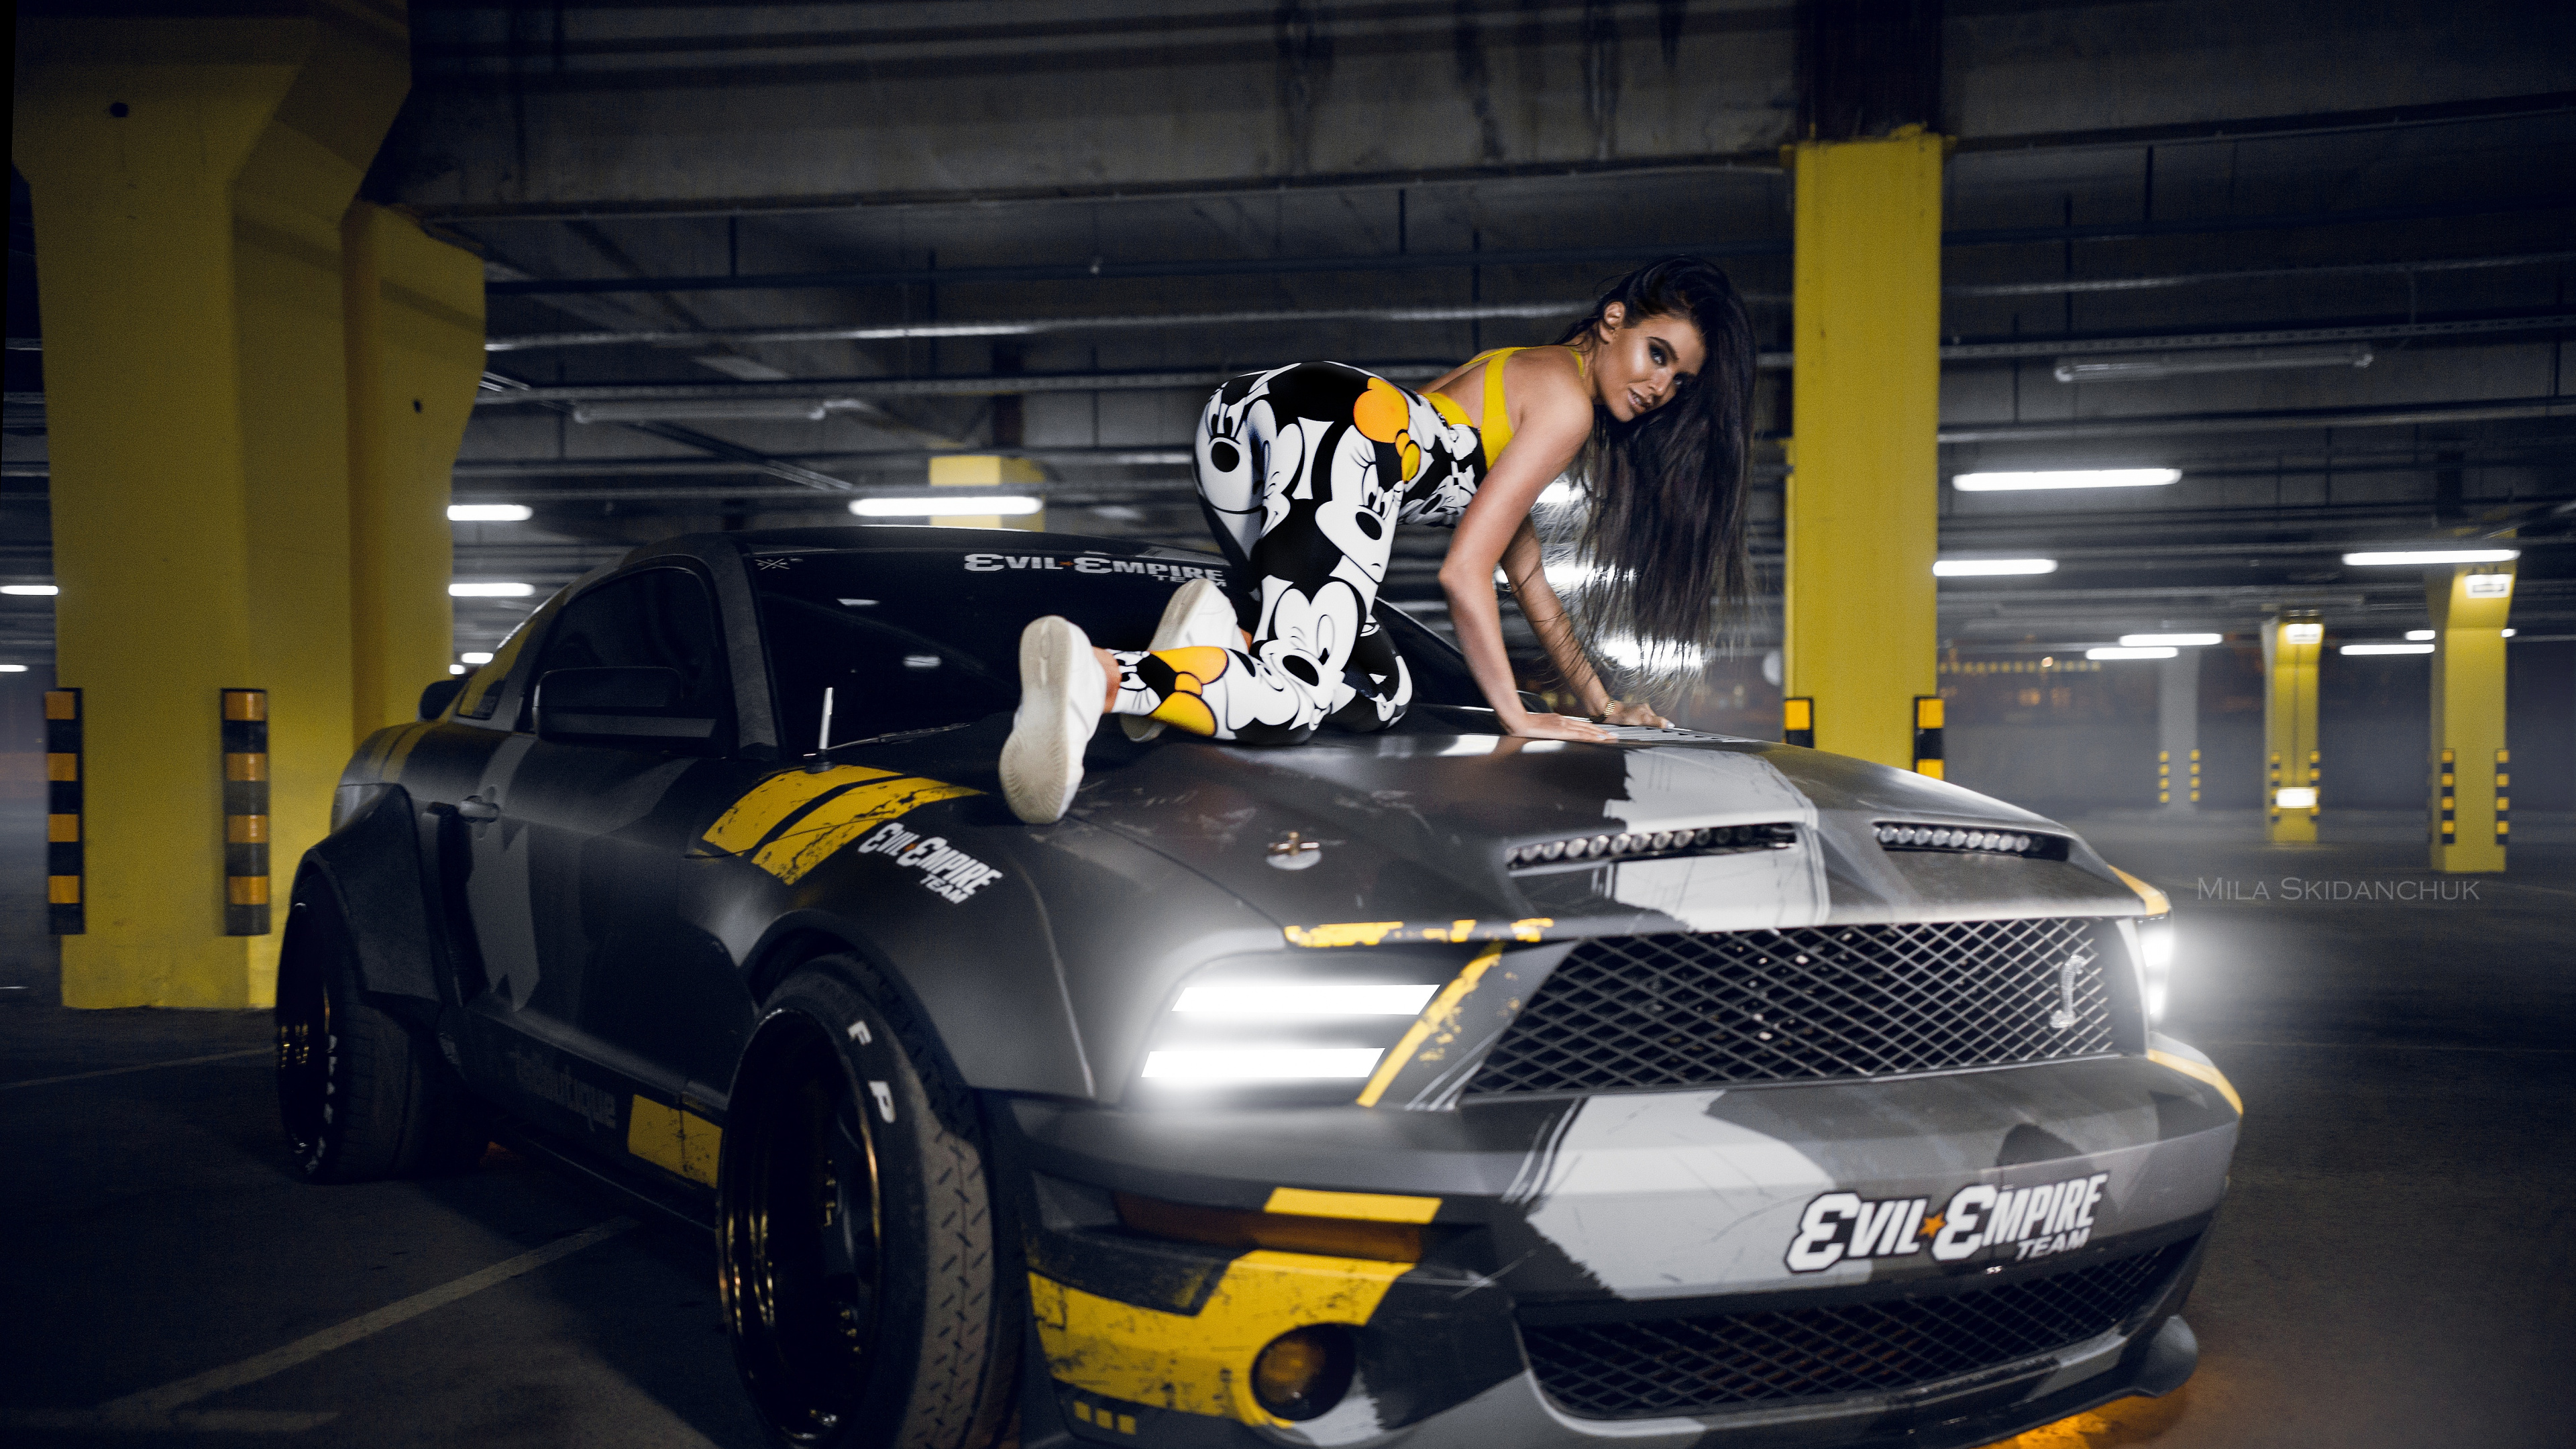 Woman in Black and White Floral Dress Riding on Black and Yellow Sports Car. Wallpaper in 3840x2160 Resolution